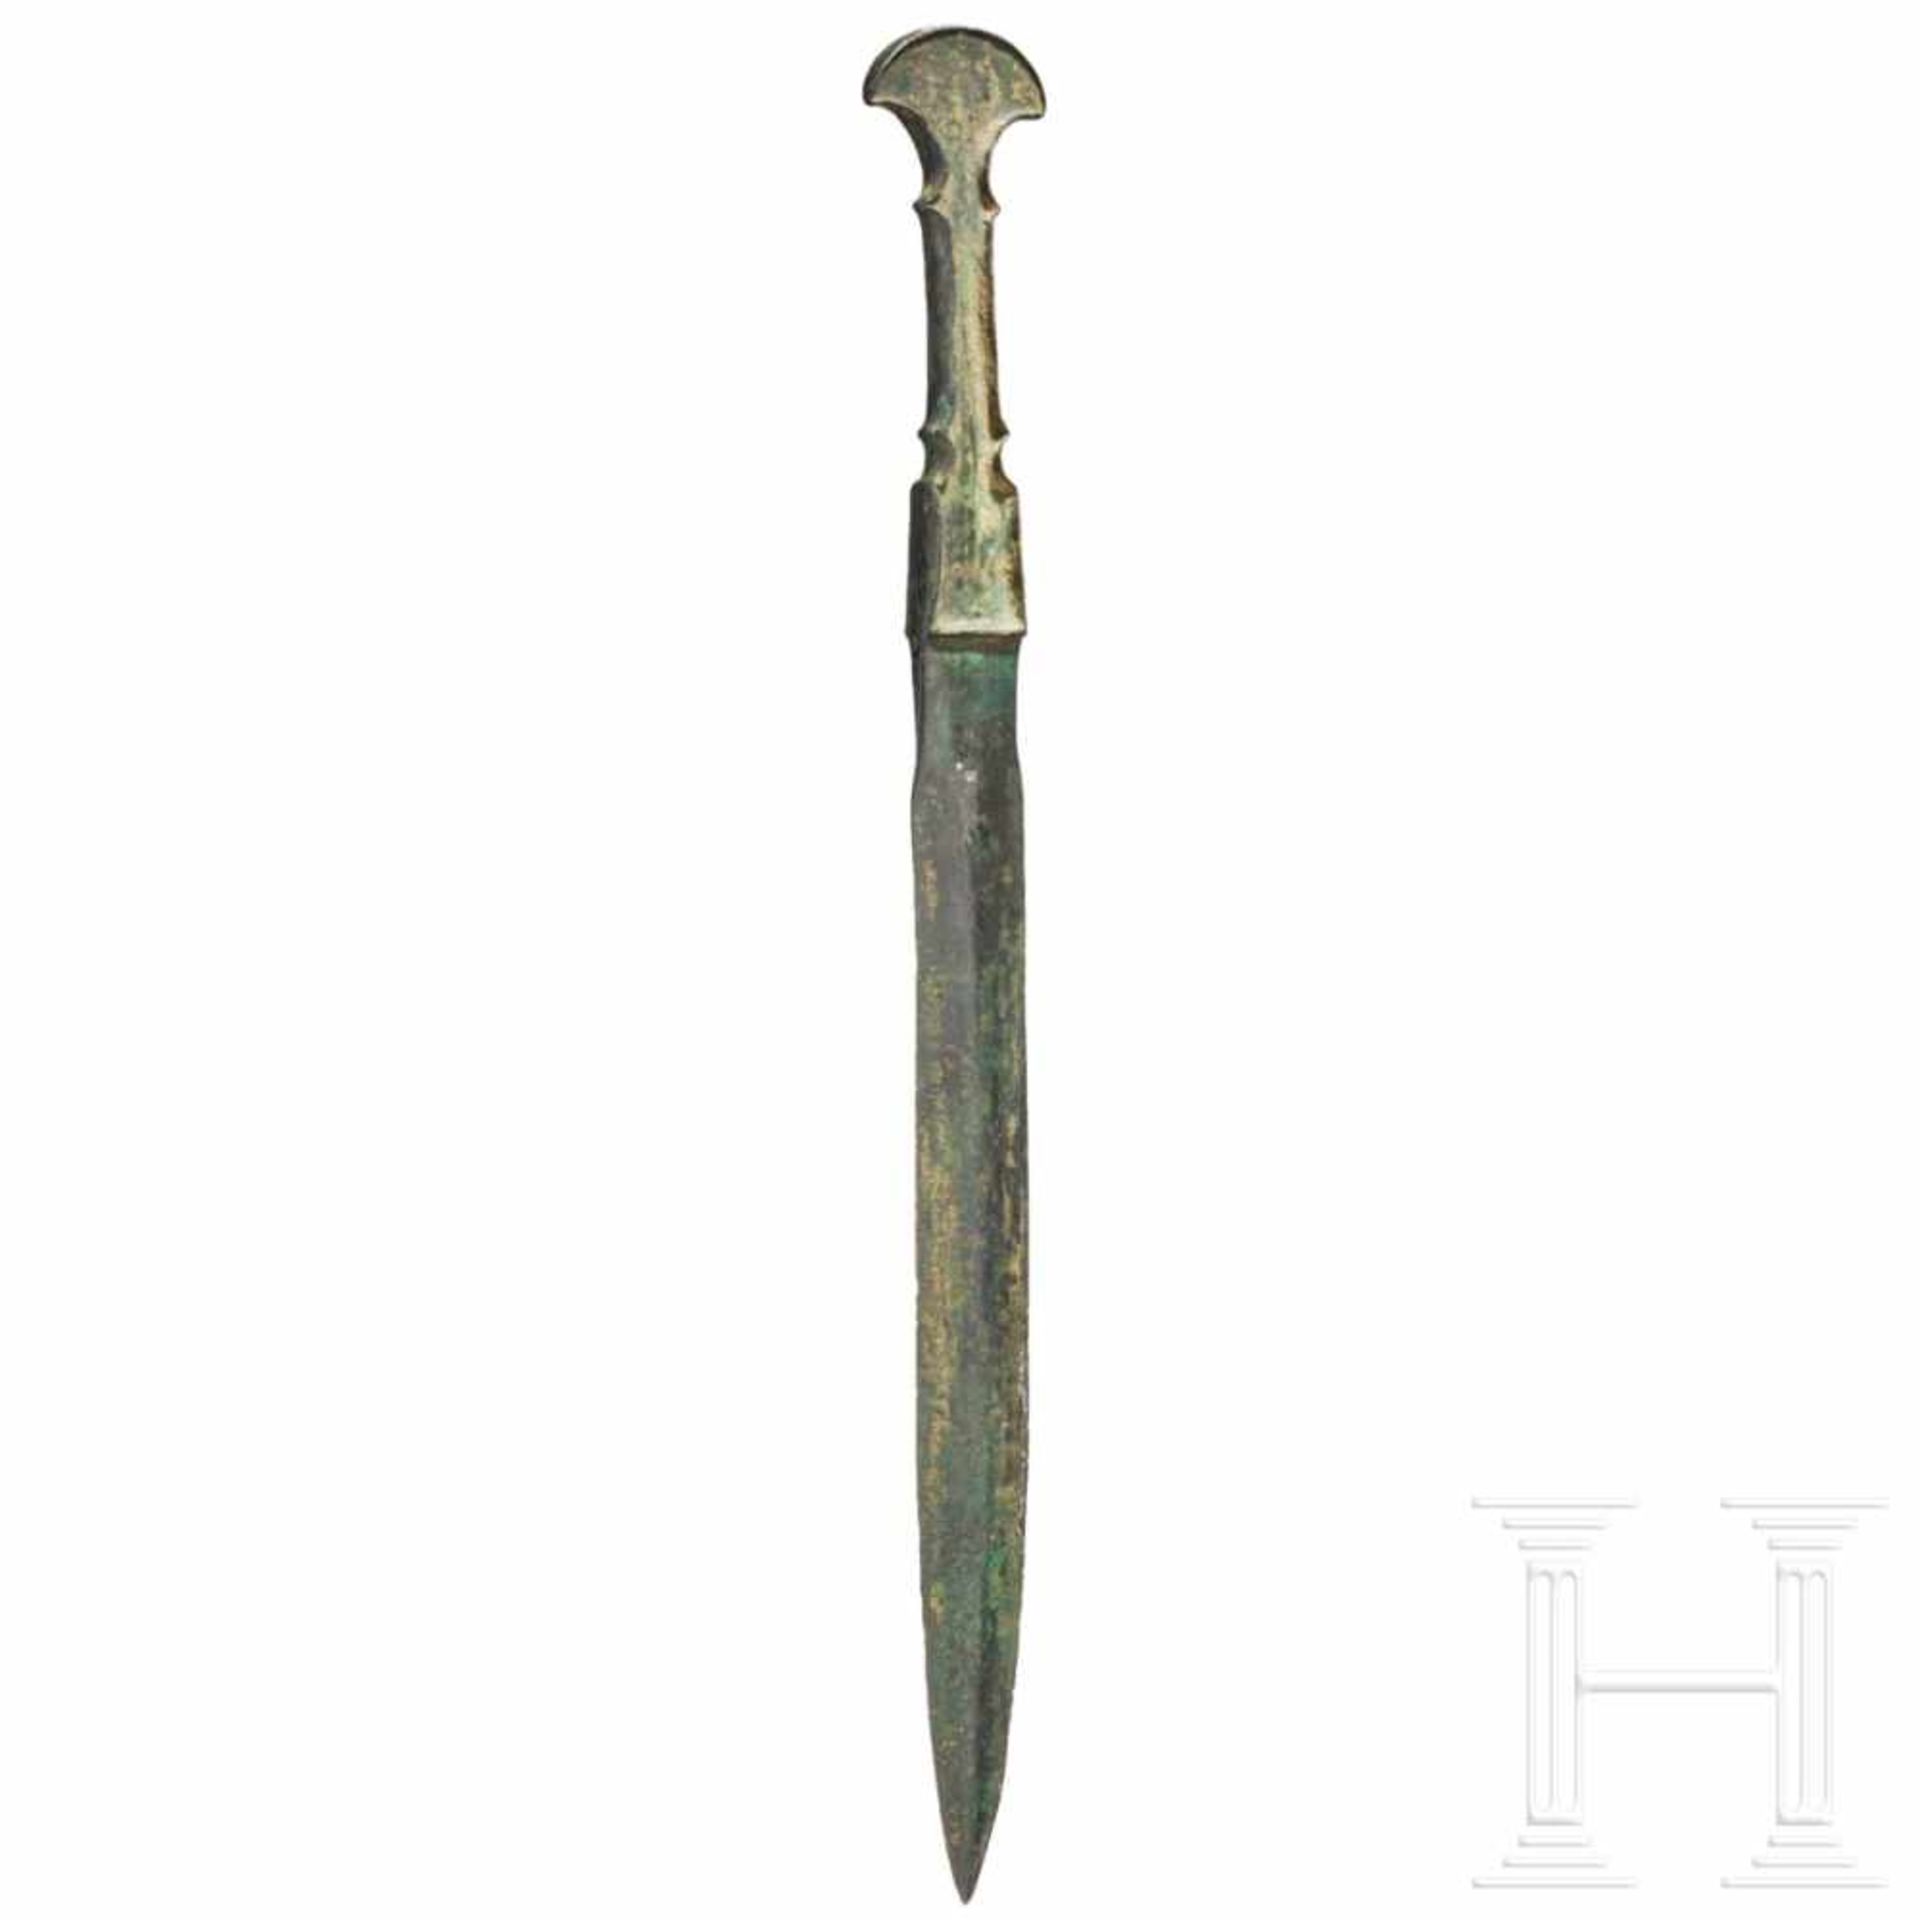 An excellently preserved Luristan dagger, 11th century B.C.A Luristan dagger with excellently - Bild 2 aus 3